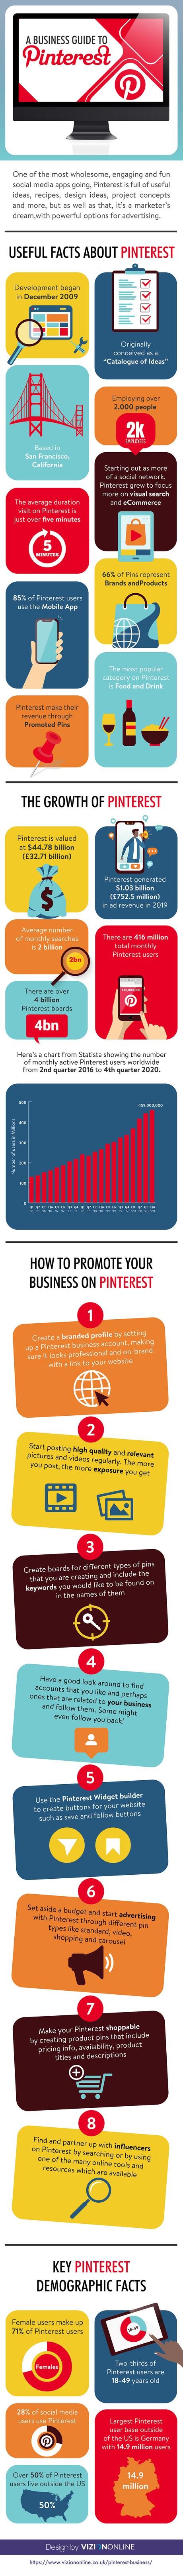 A Business Guide to Pinterest